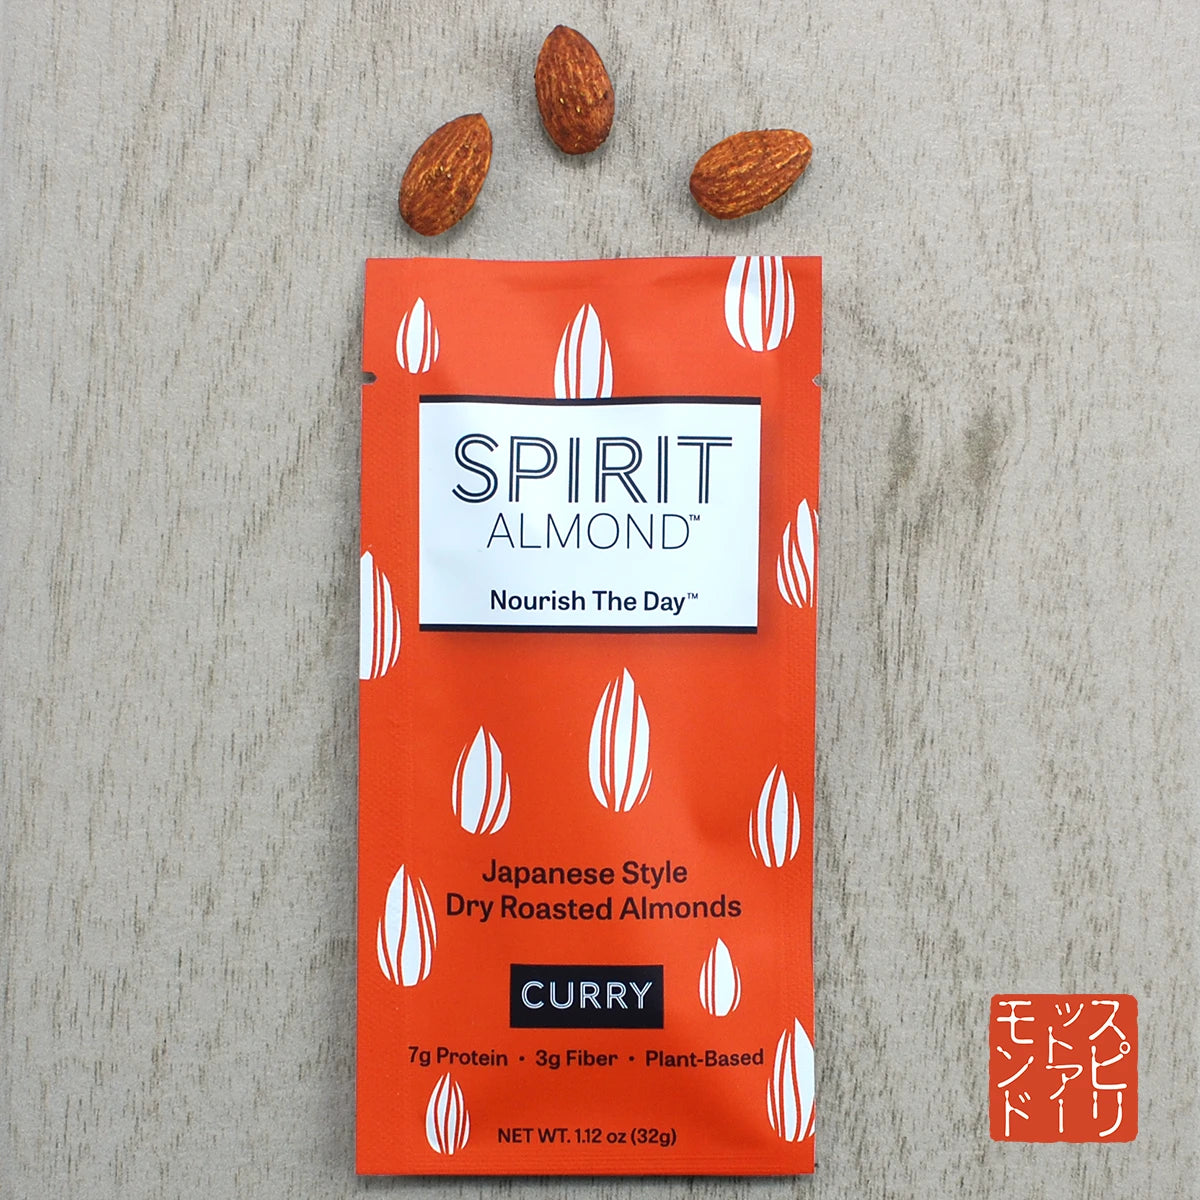 Package of SPIRIT Almond Curry flavor, with a few almonds displayed